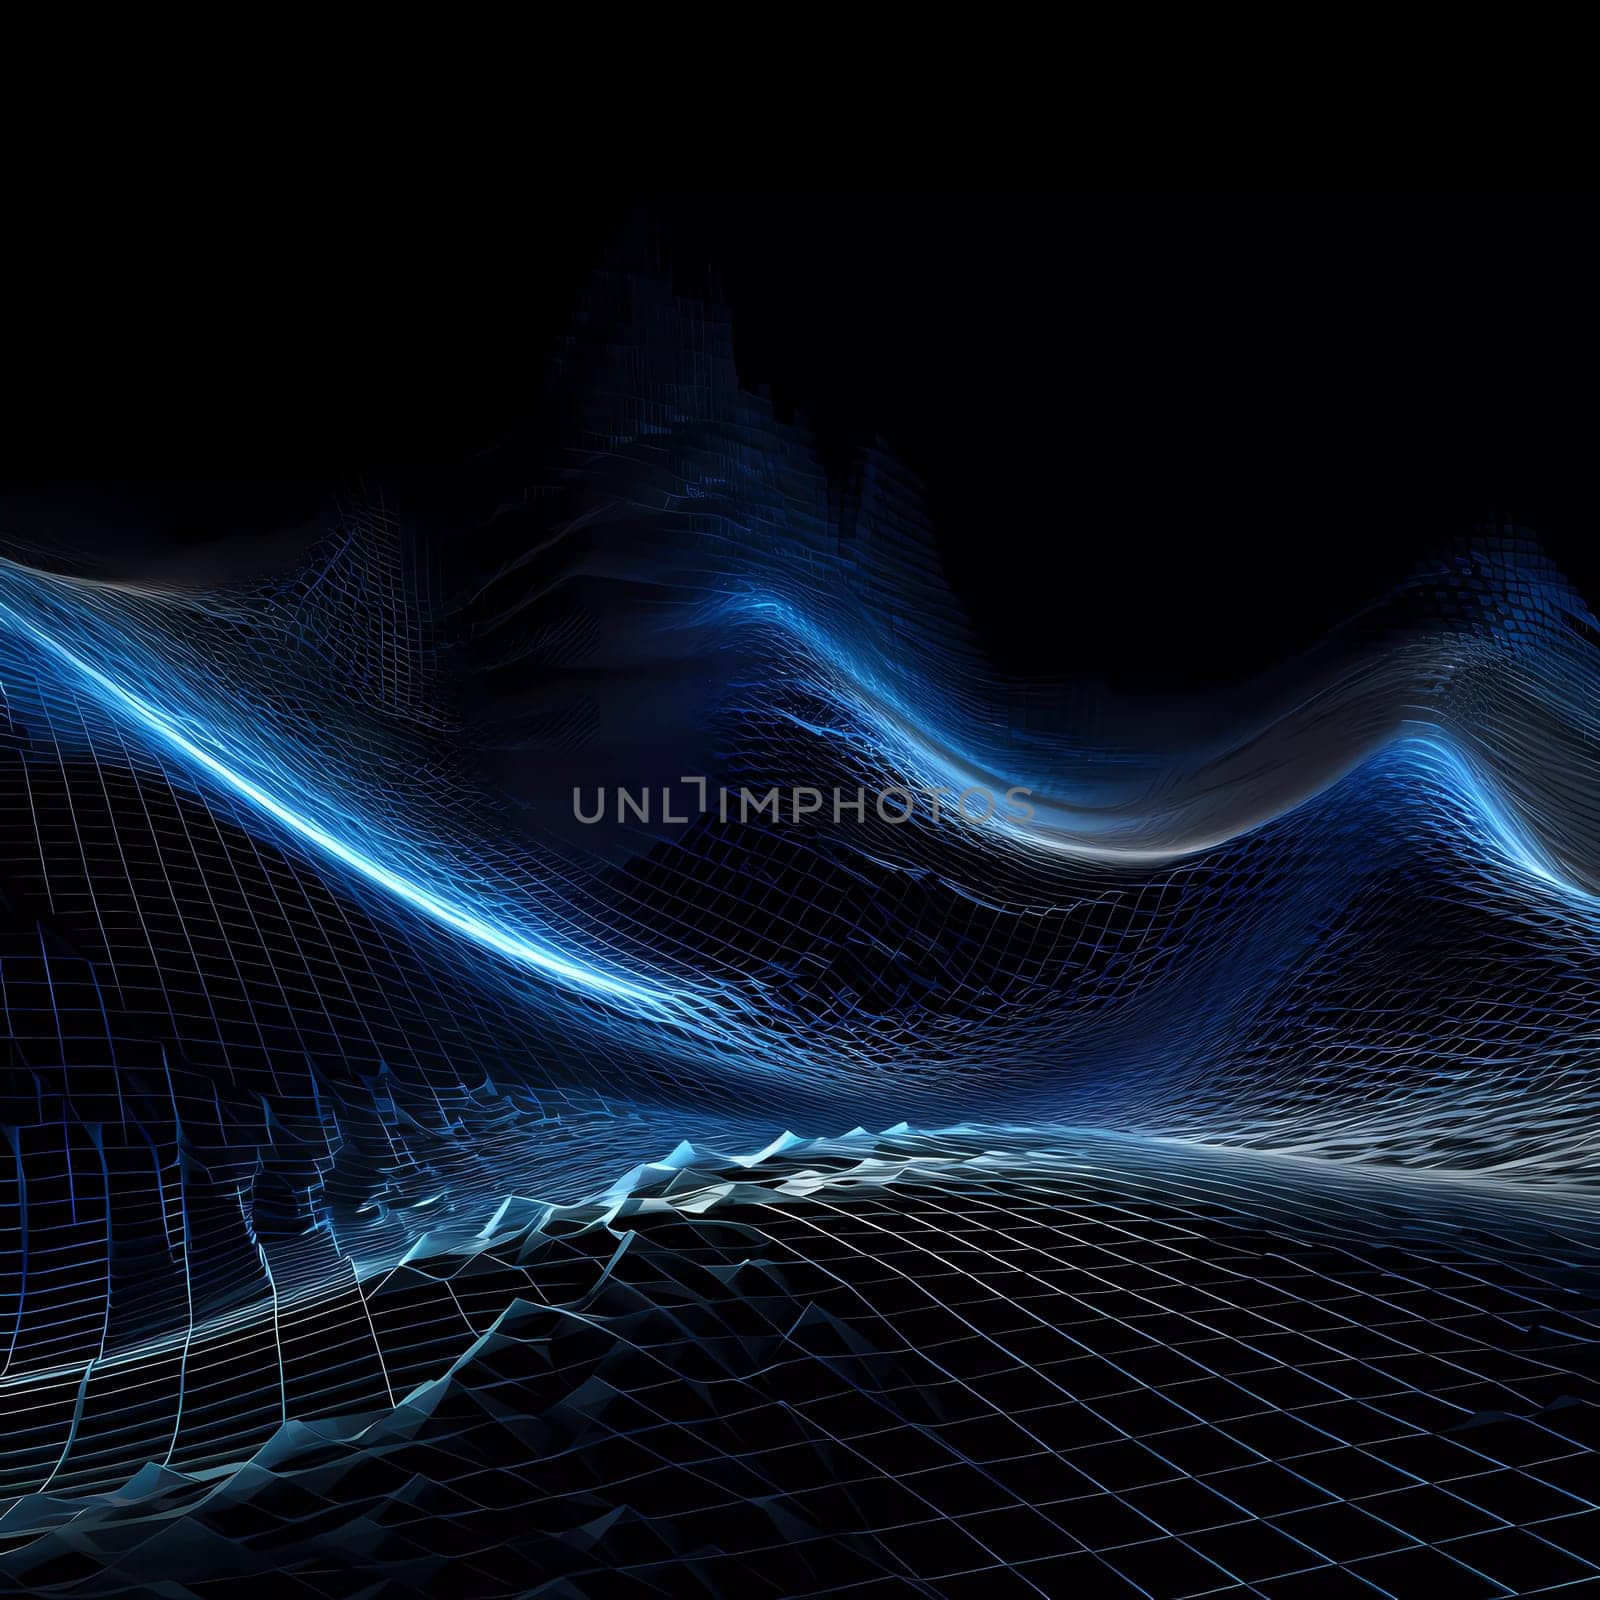 Blue Wave of dots and weave lines. Abstract background. Network connection structure